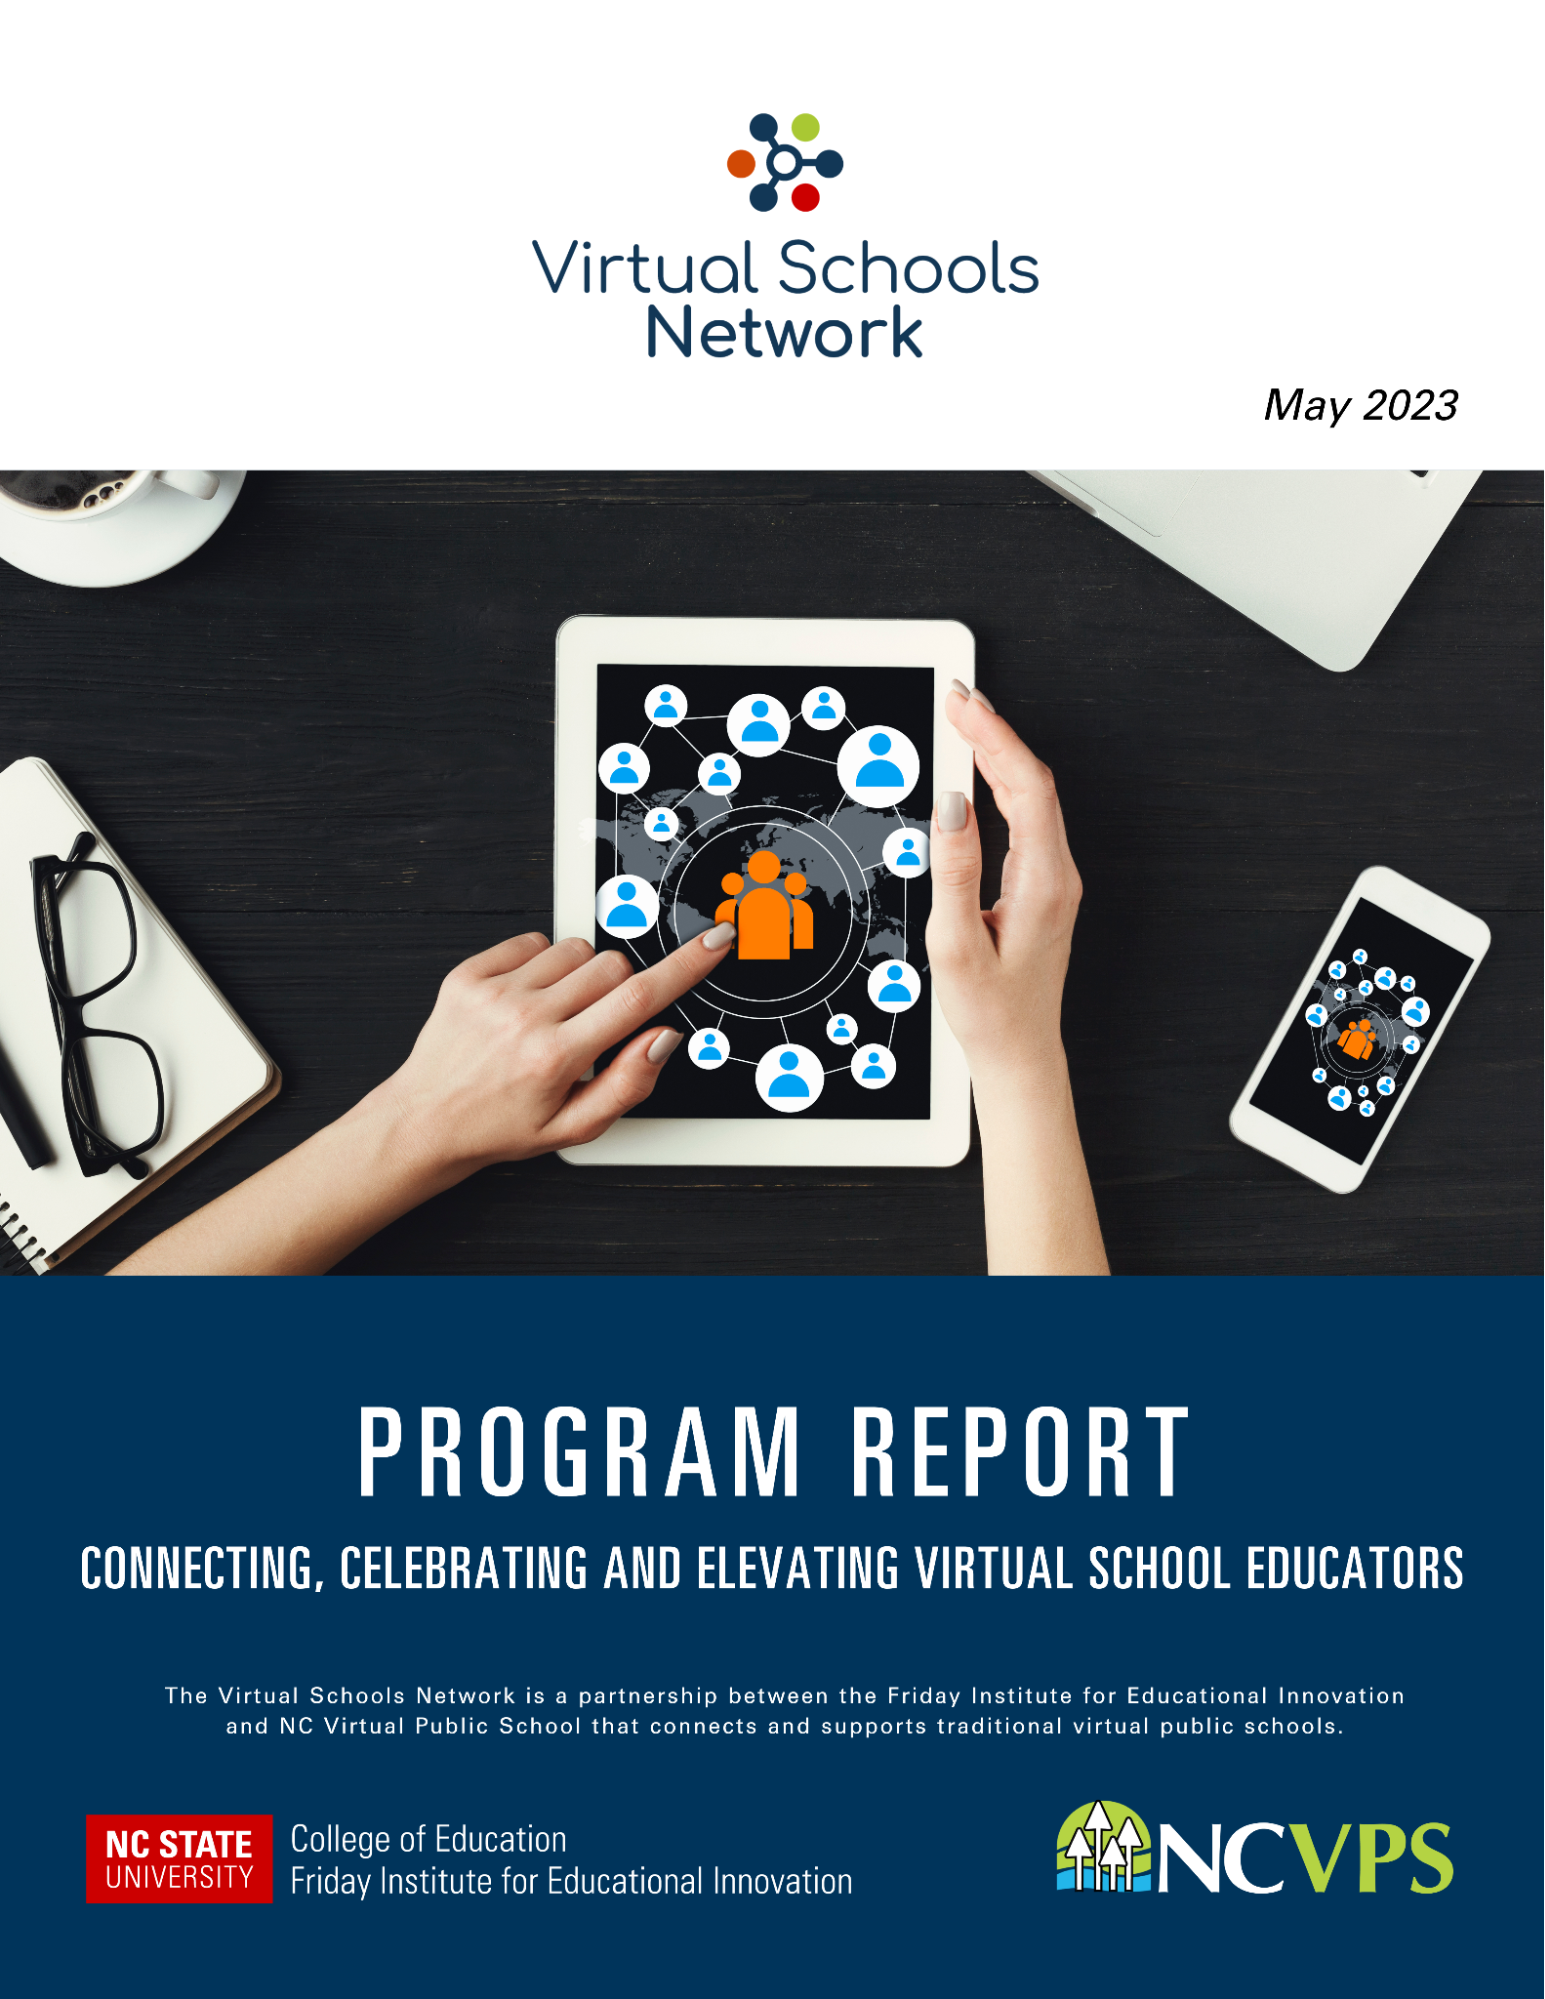 VSN Program Report features an image of a person holding a computer tablet touching the screen that has various bubbles and icons